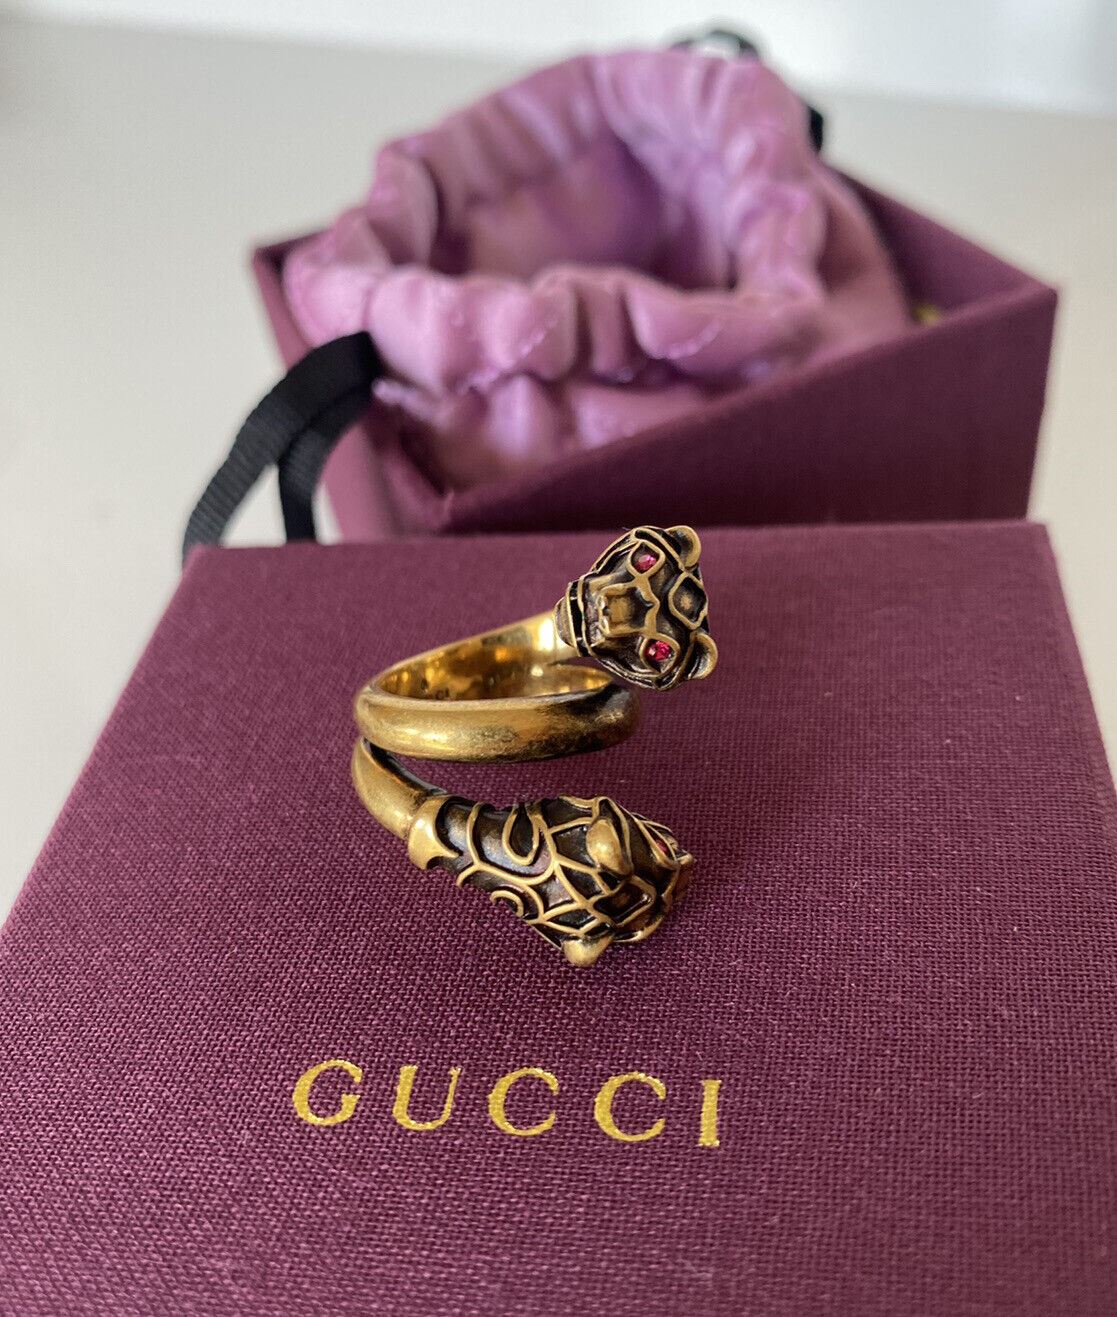 NWB Authentic GUCCI Red Crystal Gucci Tiger Head Ring Size 13 (16.8 mm) Italy